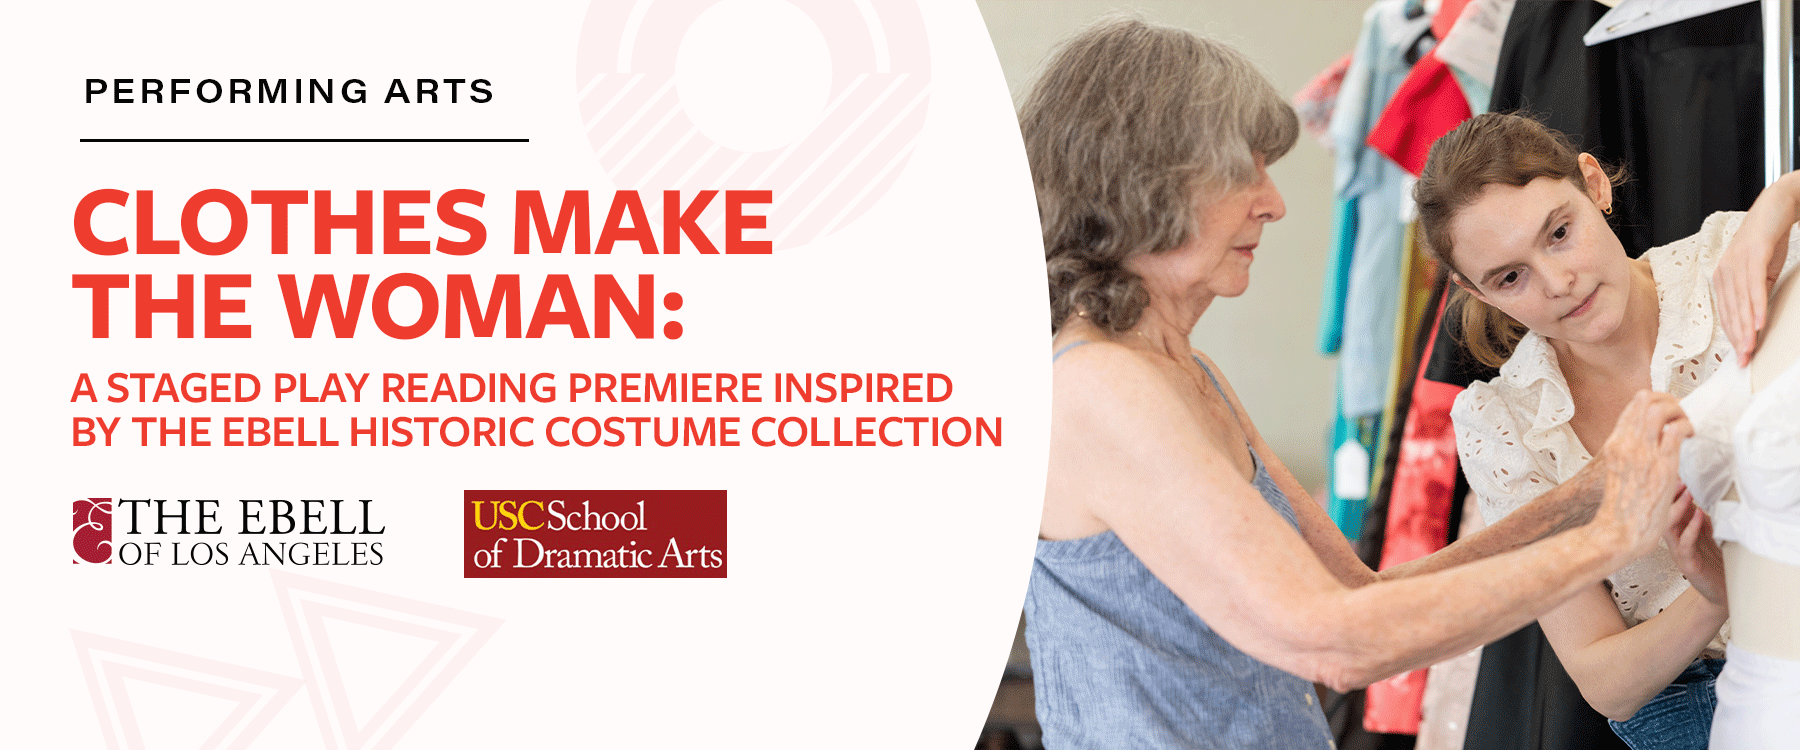 Clothes Make The Woman: A Staged Play Reading Premiere Inspired by The Ebell Historic Costume Collection